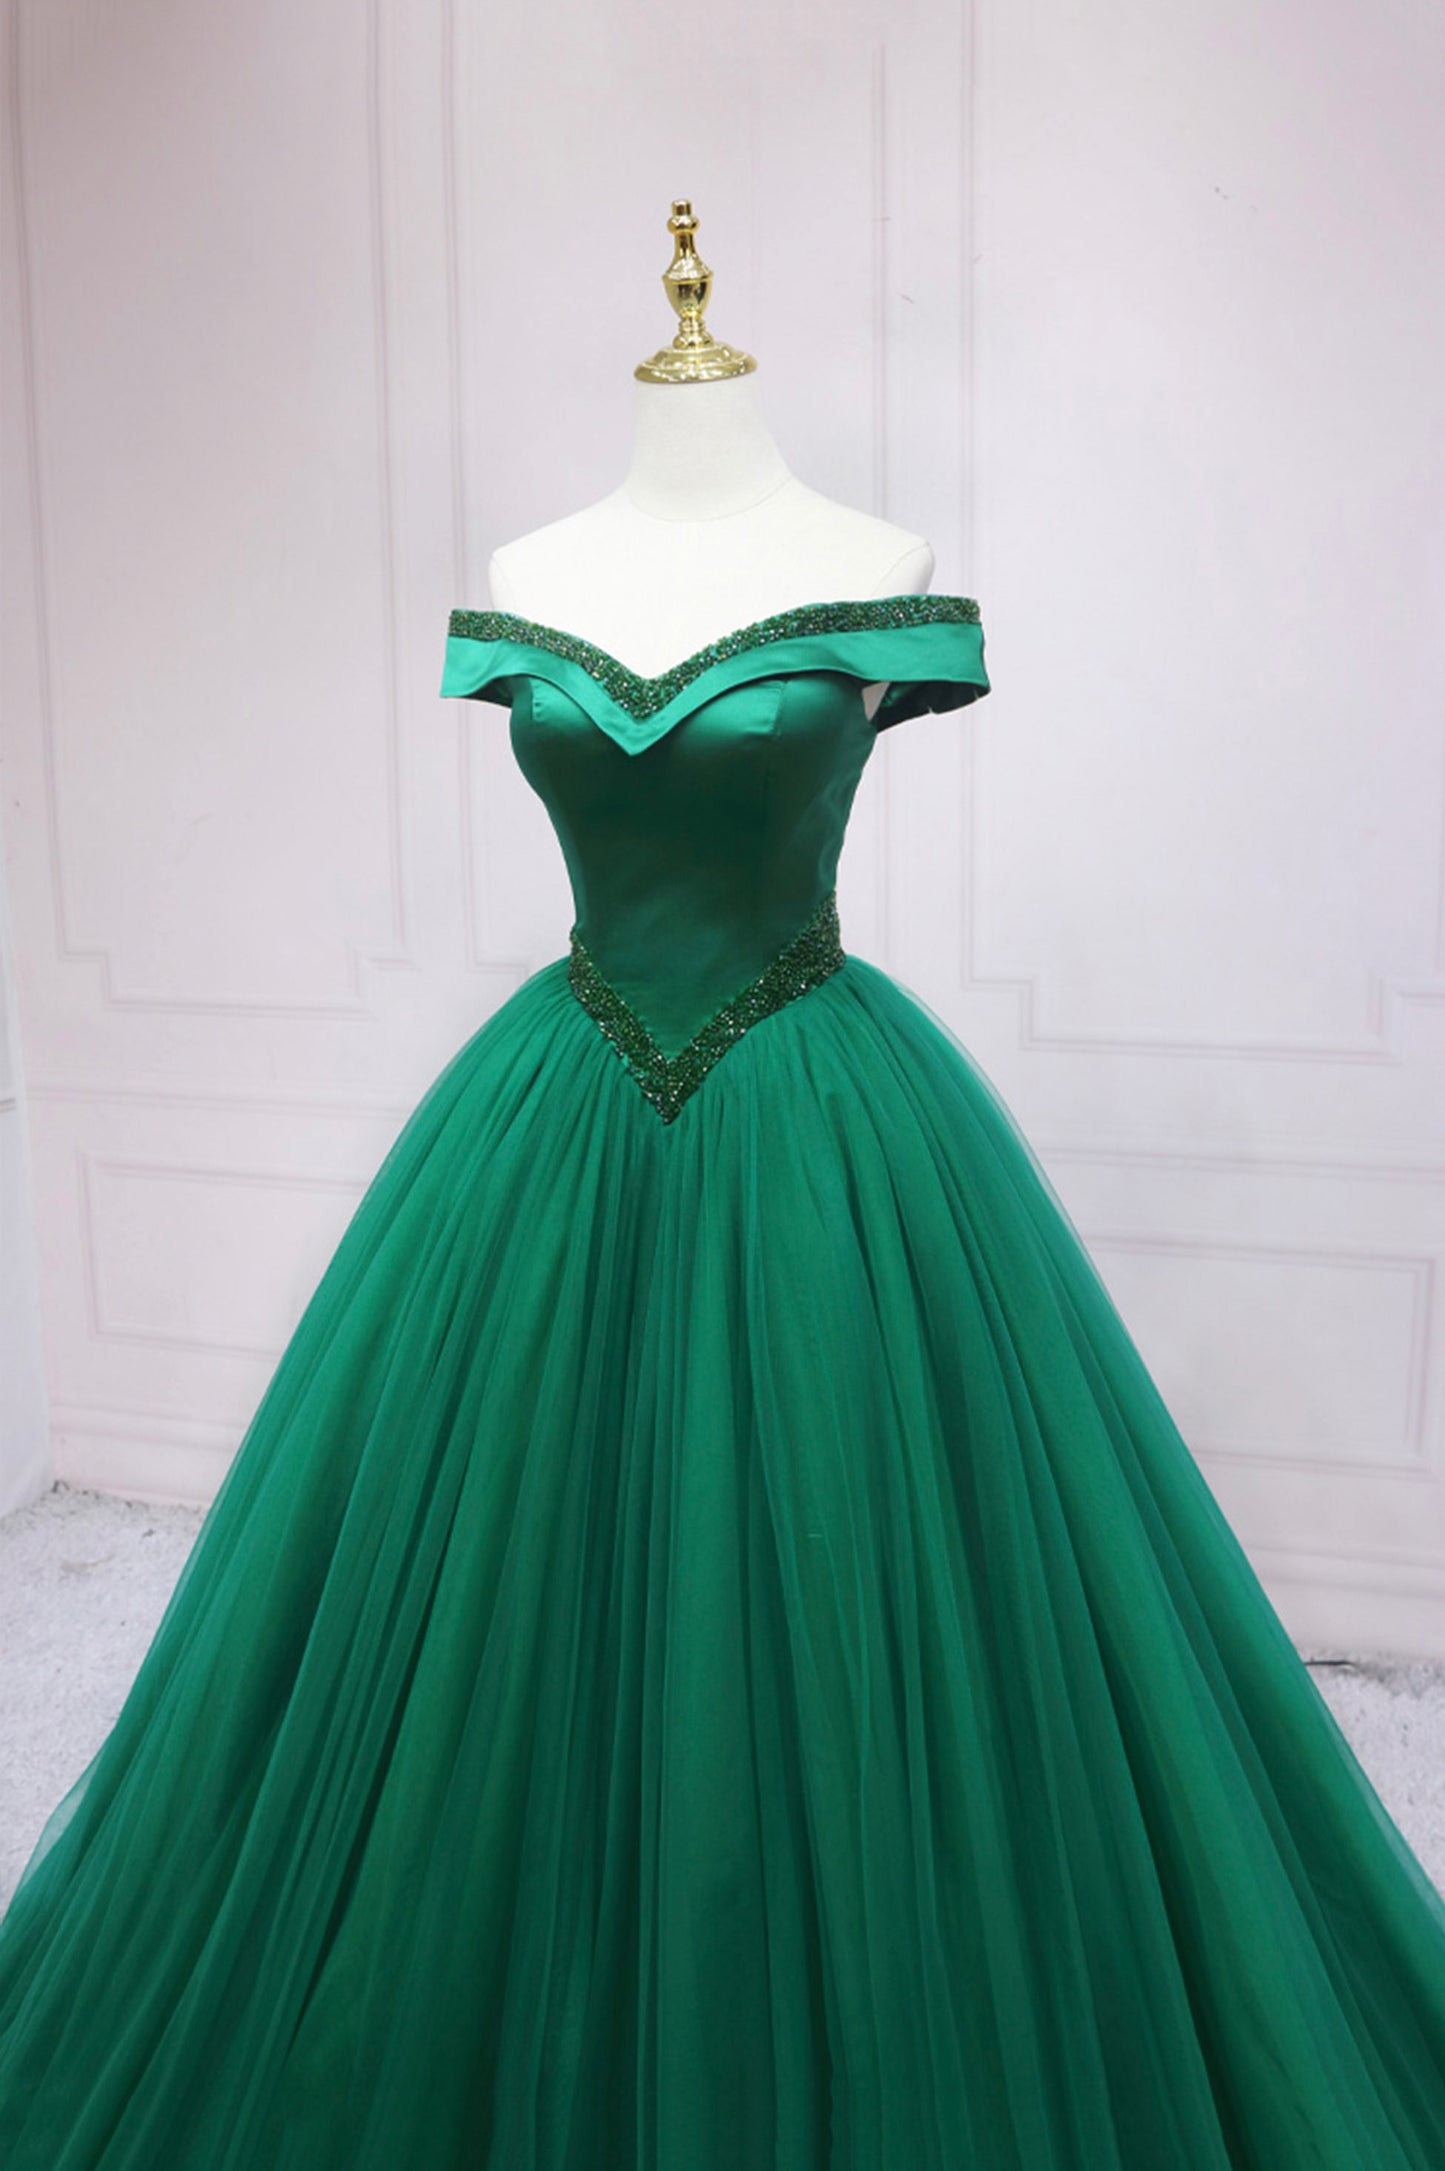 Green Tulle Beaded Long Ball Gown Formal Dress, Off the Shoulder Evening Dress